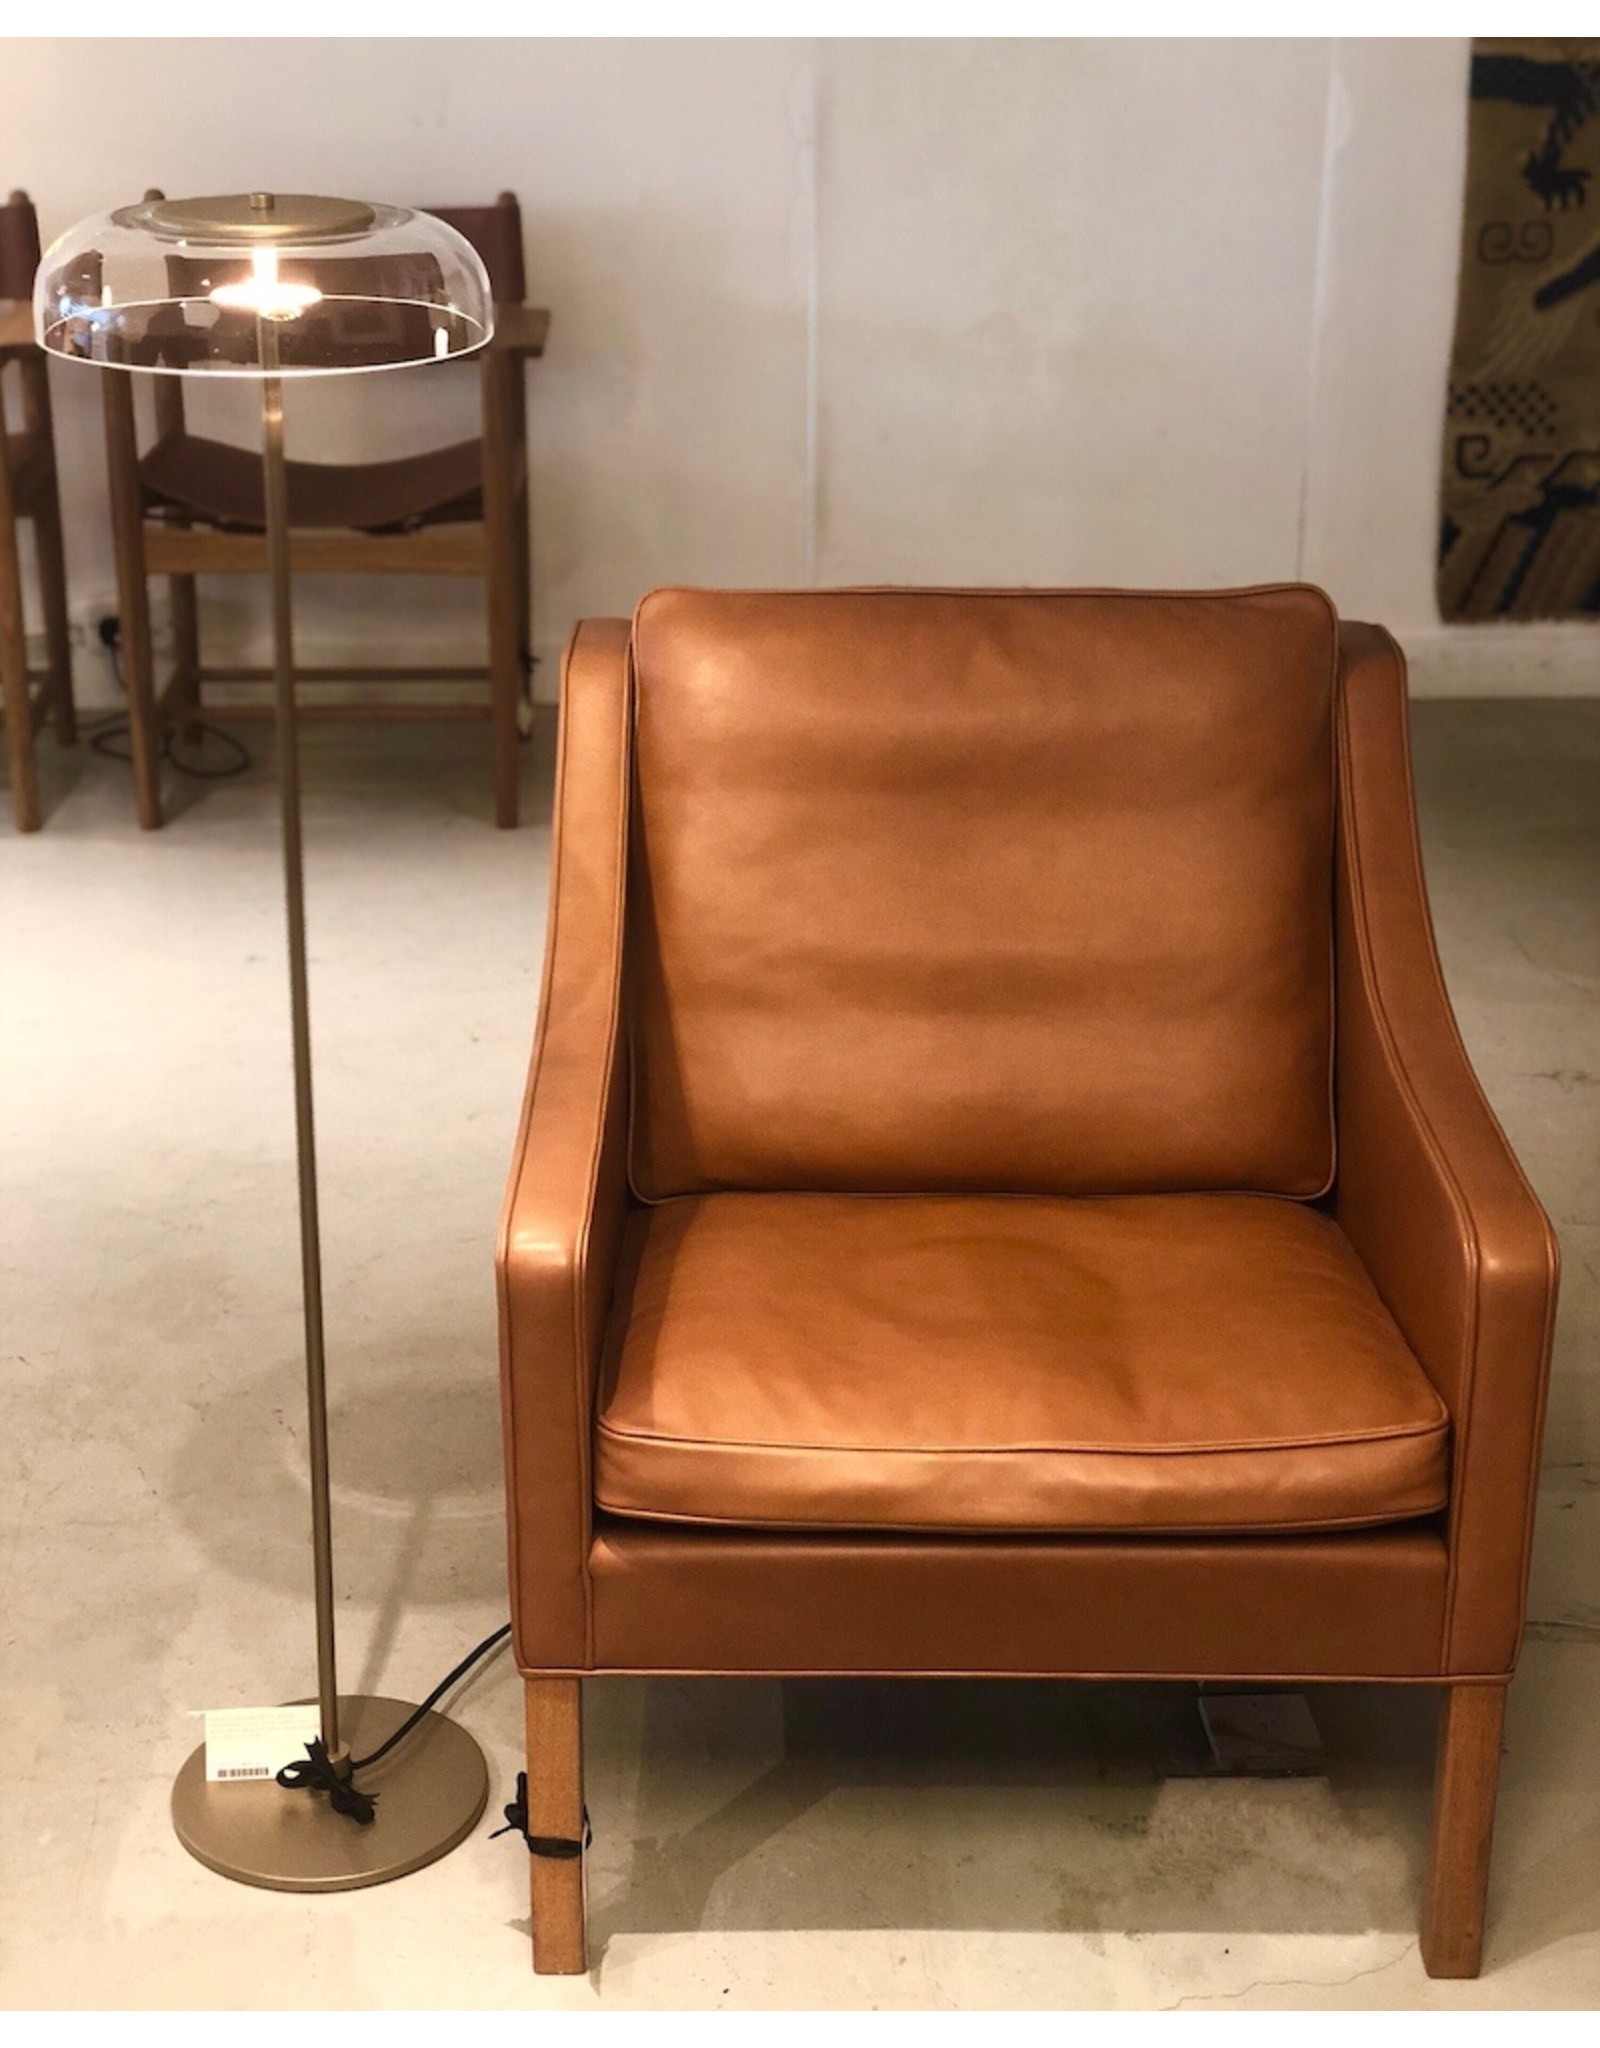 2207 LOUNGE CHAIR UPHOLSTERED IN WALNUT LEATHER